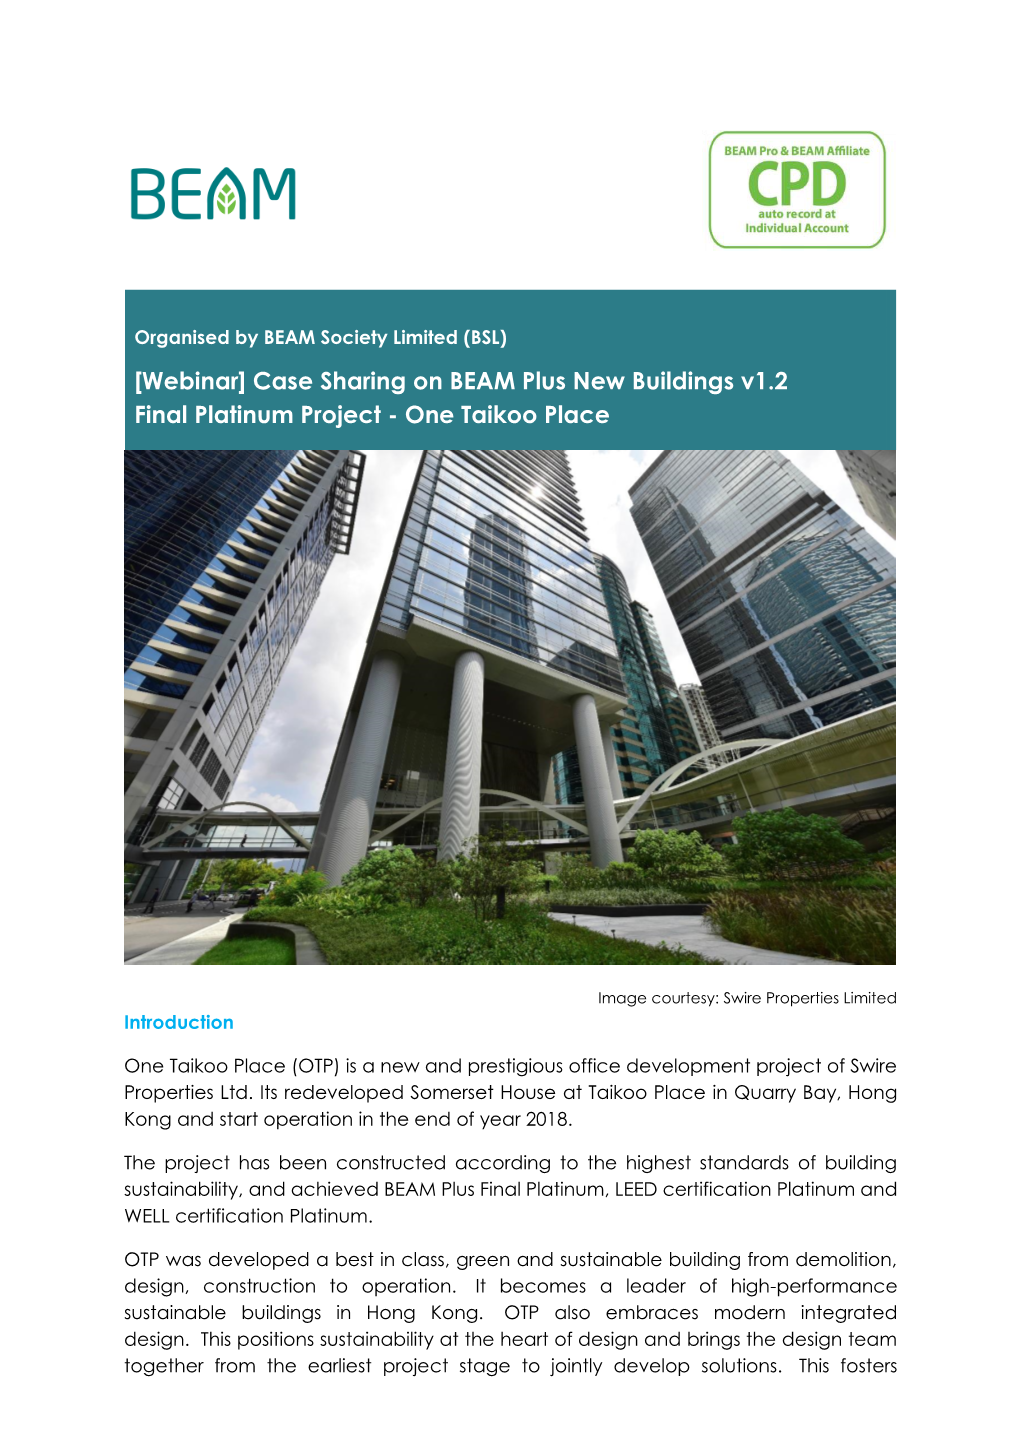 Case Sharing on BEAM Plus New Buildings V1.2 Final Platinum Project - One Taikoo Place